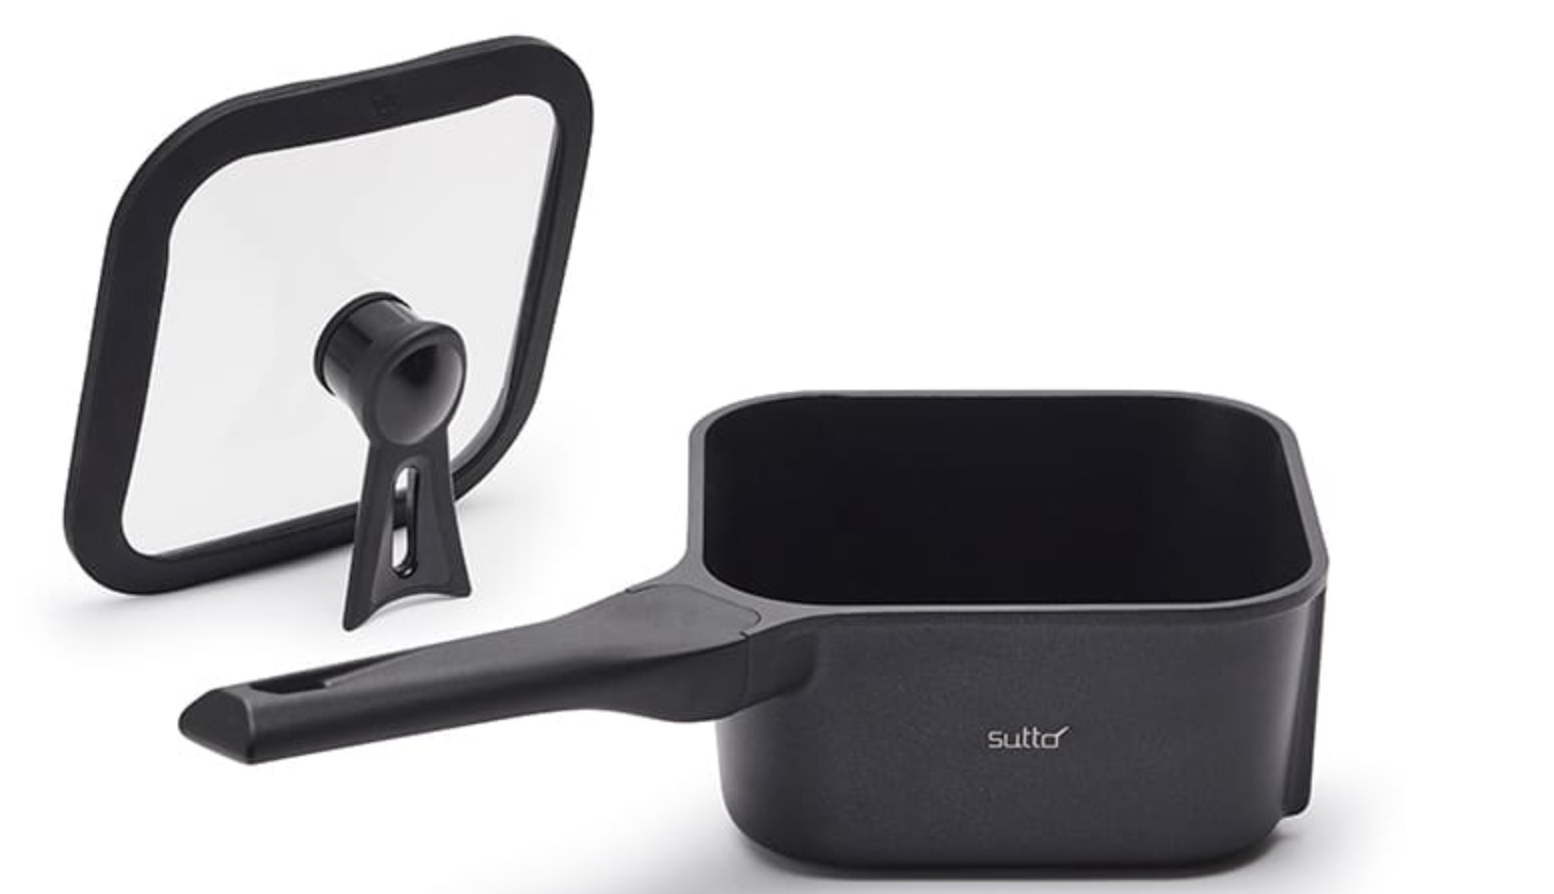 Square frying pans easy to store and save space - Japan Today